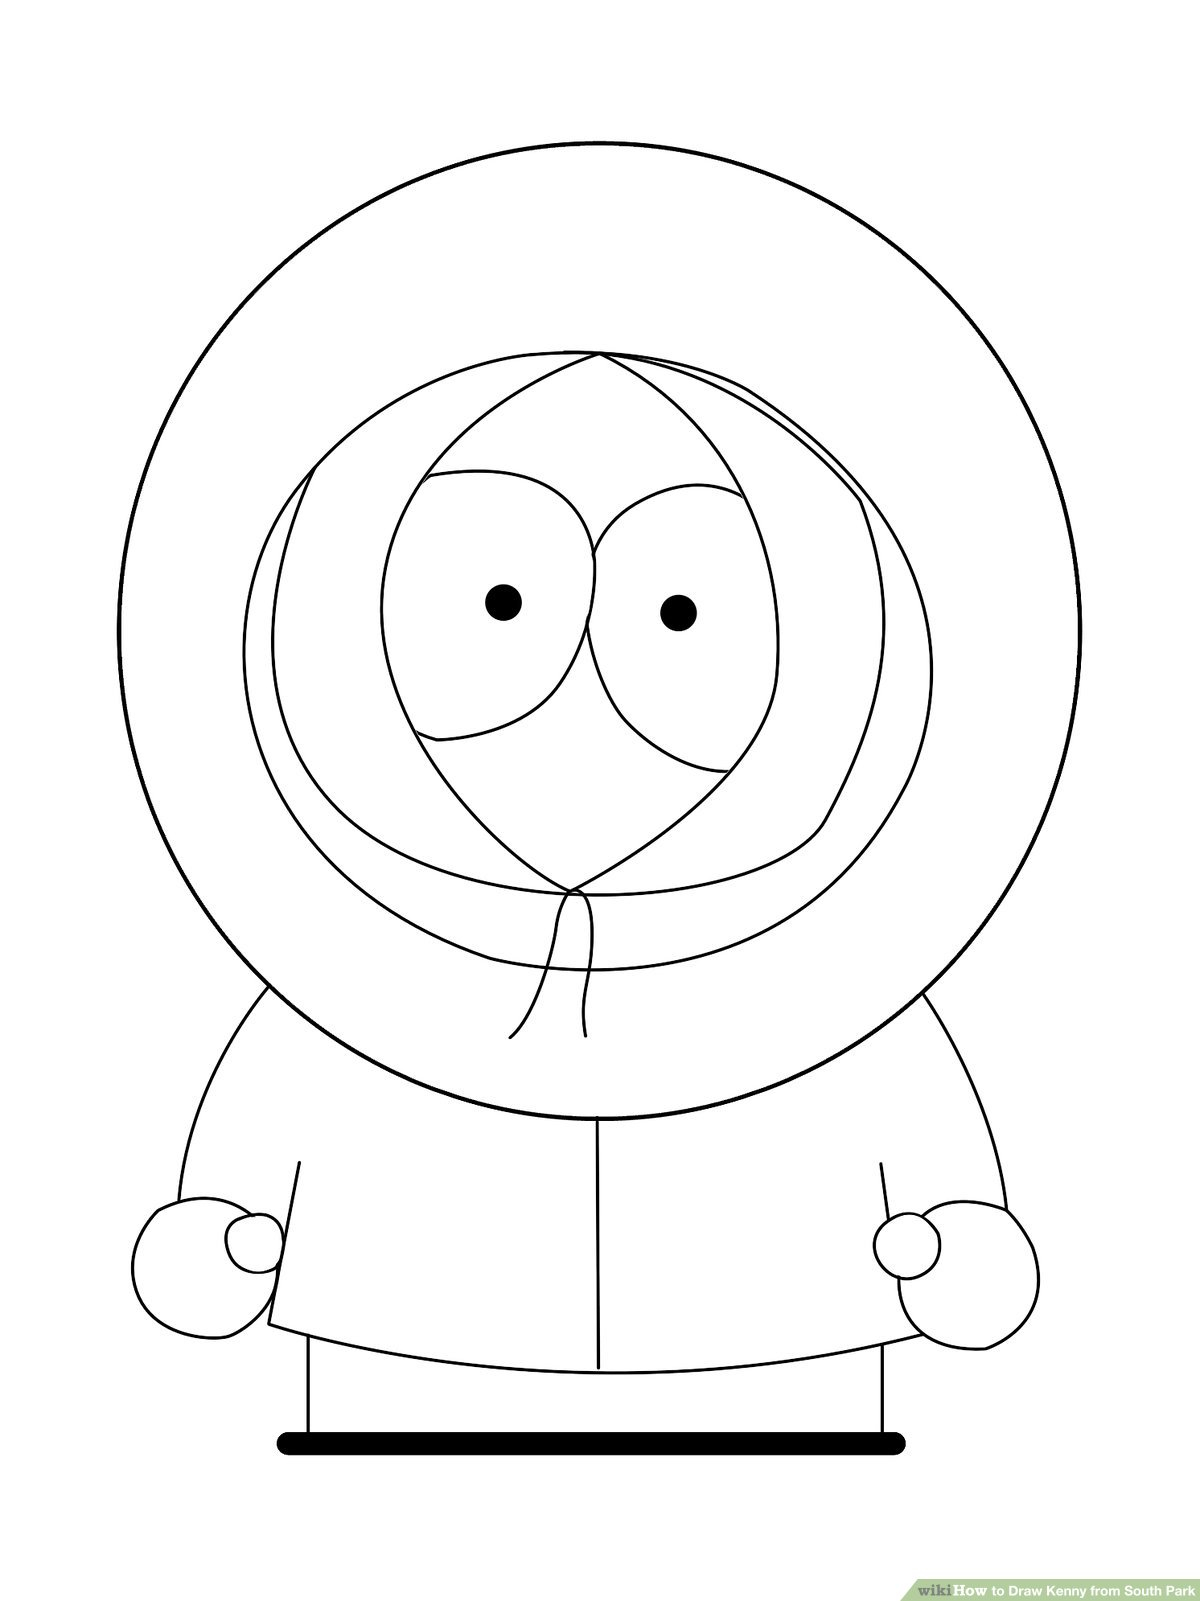 South Park Coloring Page How To Draw Kenny From South Park With Pictures Wikihow